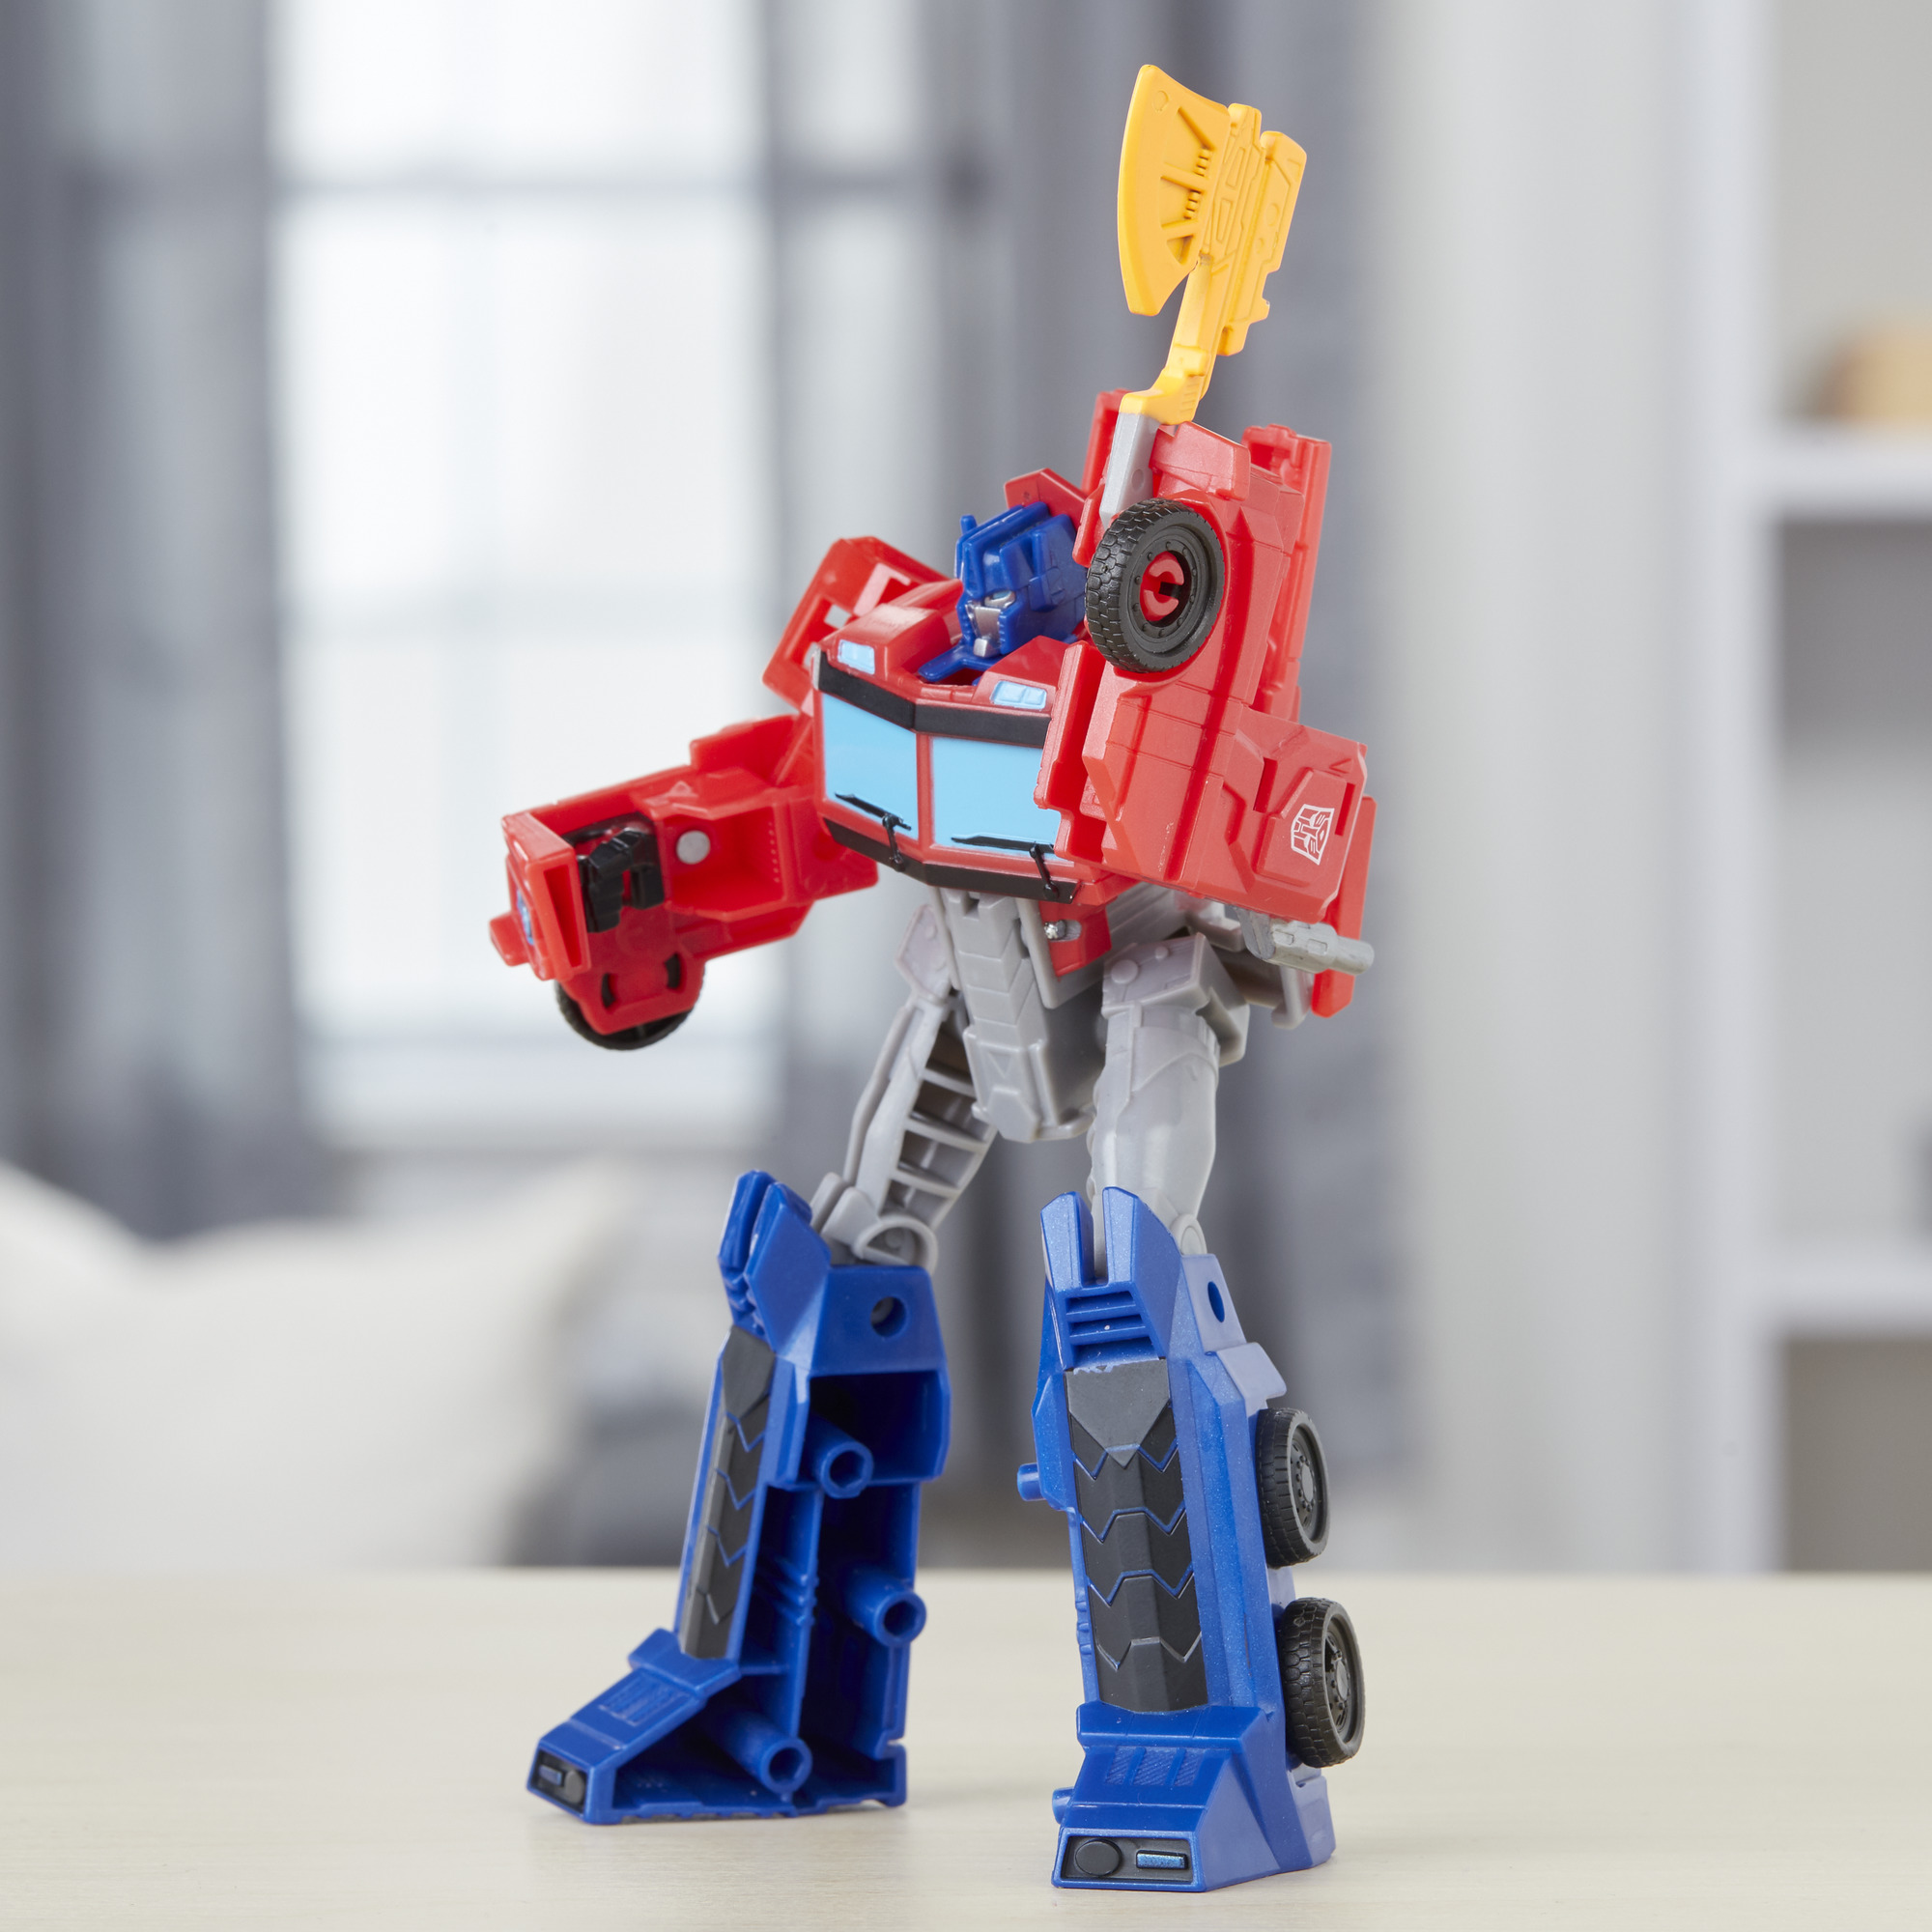 Transformers Cyberverse Warrior Class Optimus Prime - image 4 of 12